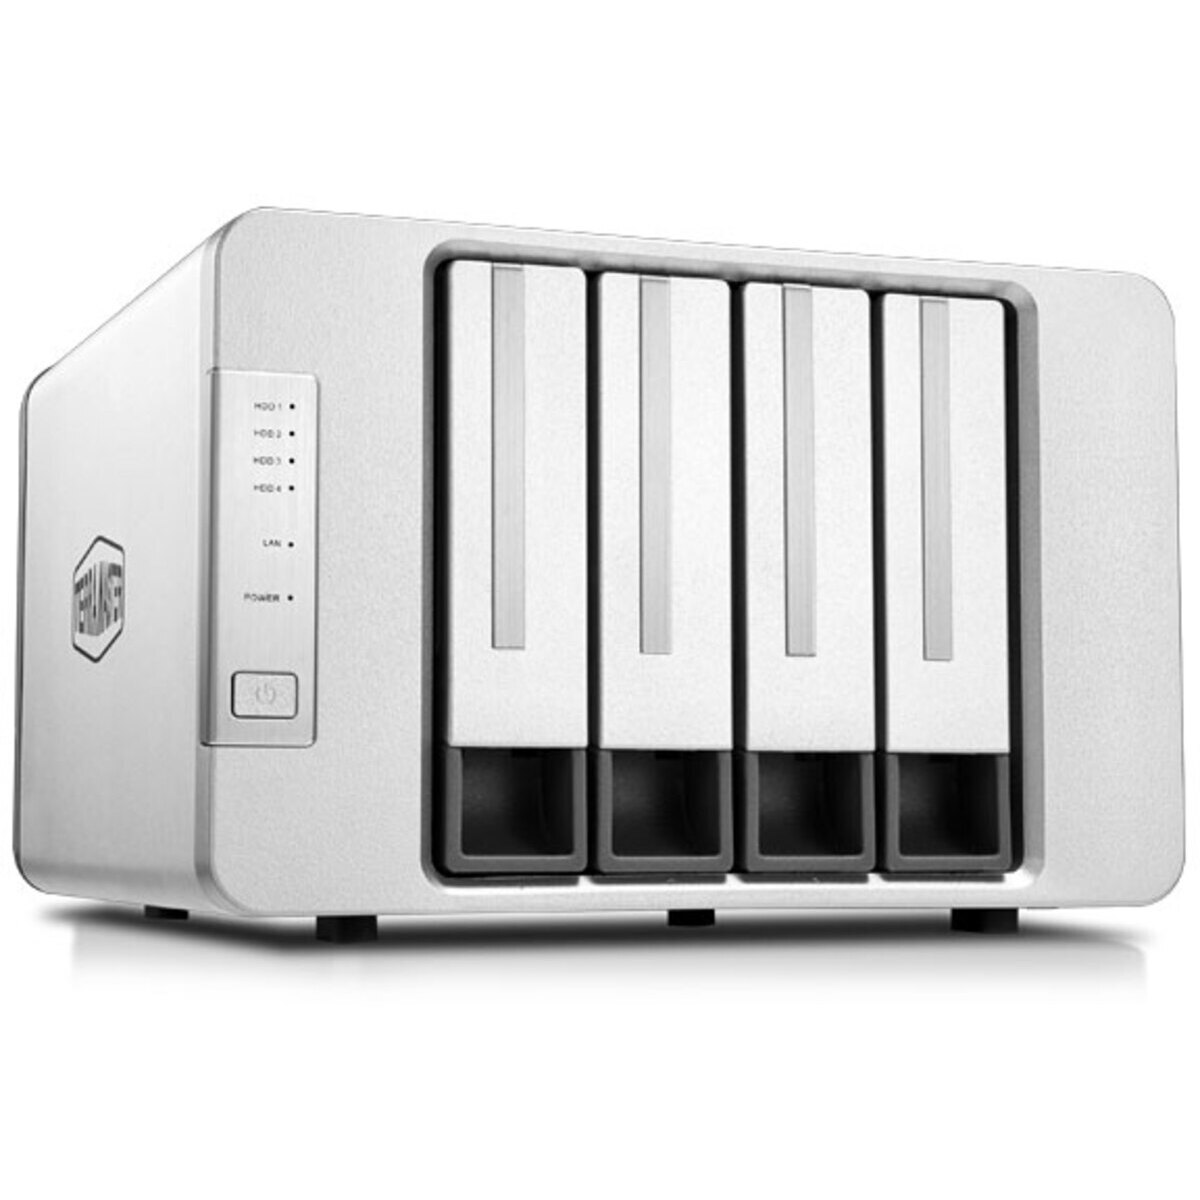 TerraMaster F4-223 12tb 4-Bay Desktop Personal / Basic Home / Small Office NAS - Network Attached Storage Device 3x4tb Seagate IronWolf Pro ST4000NT001 3.5 7200rpm SATA 6Gb/s HDD NAS Class Drives Installed - Burn-In Tested - FREE RAM UPGRADE F4-223